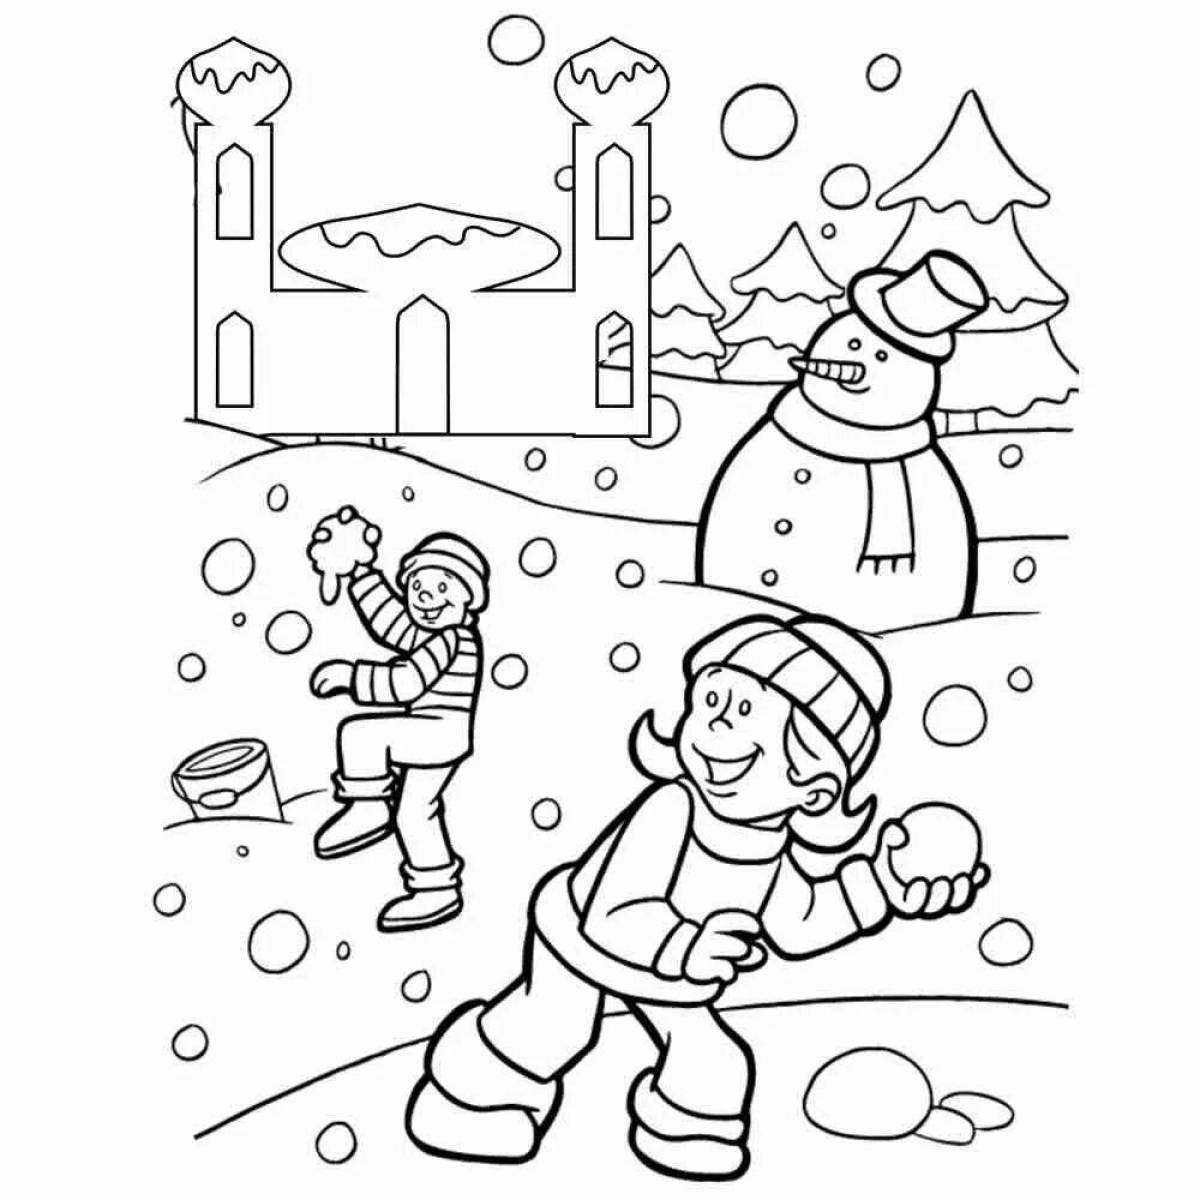 Live coloring winter games